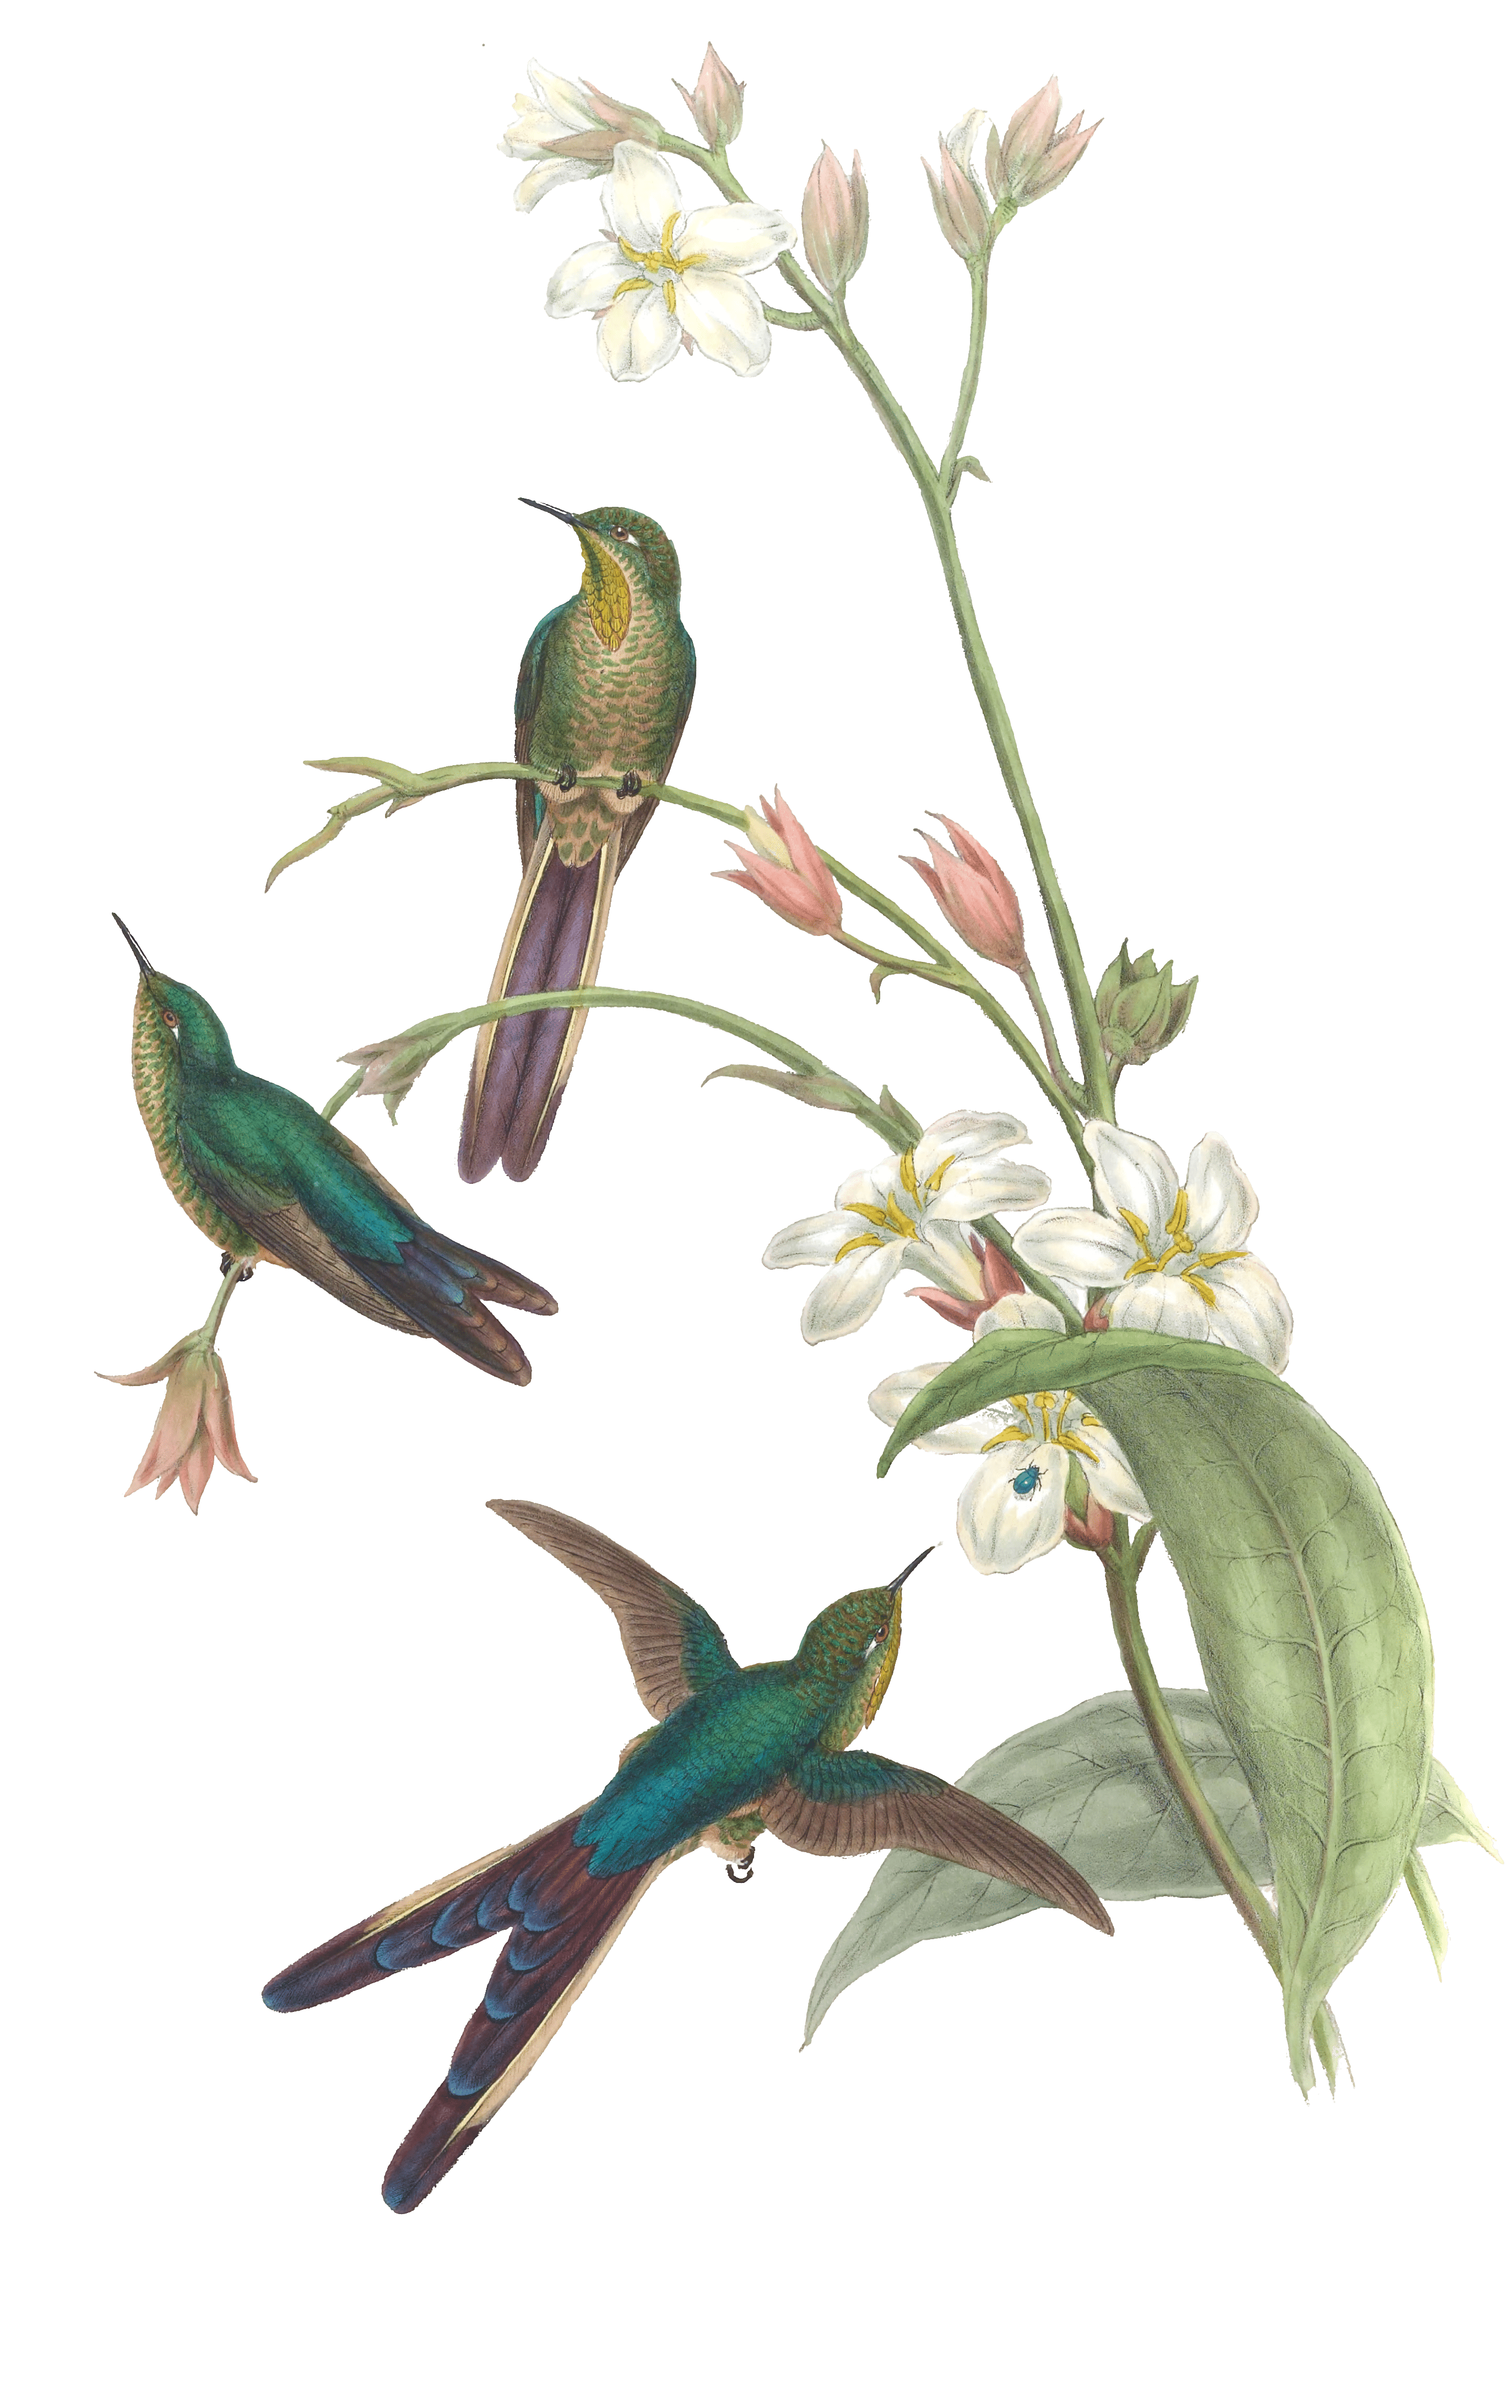 Vintage Illustration Of Purple Tailed Comet Hummingbird In The Public Domain